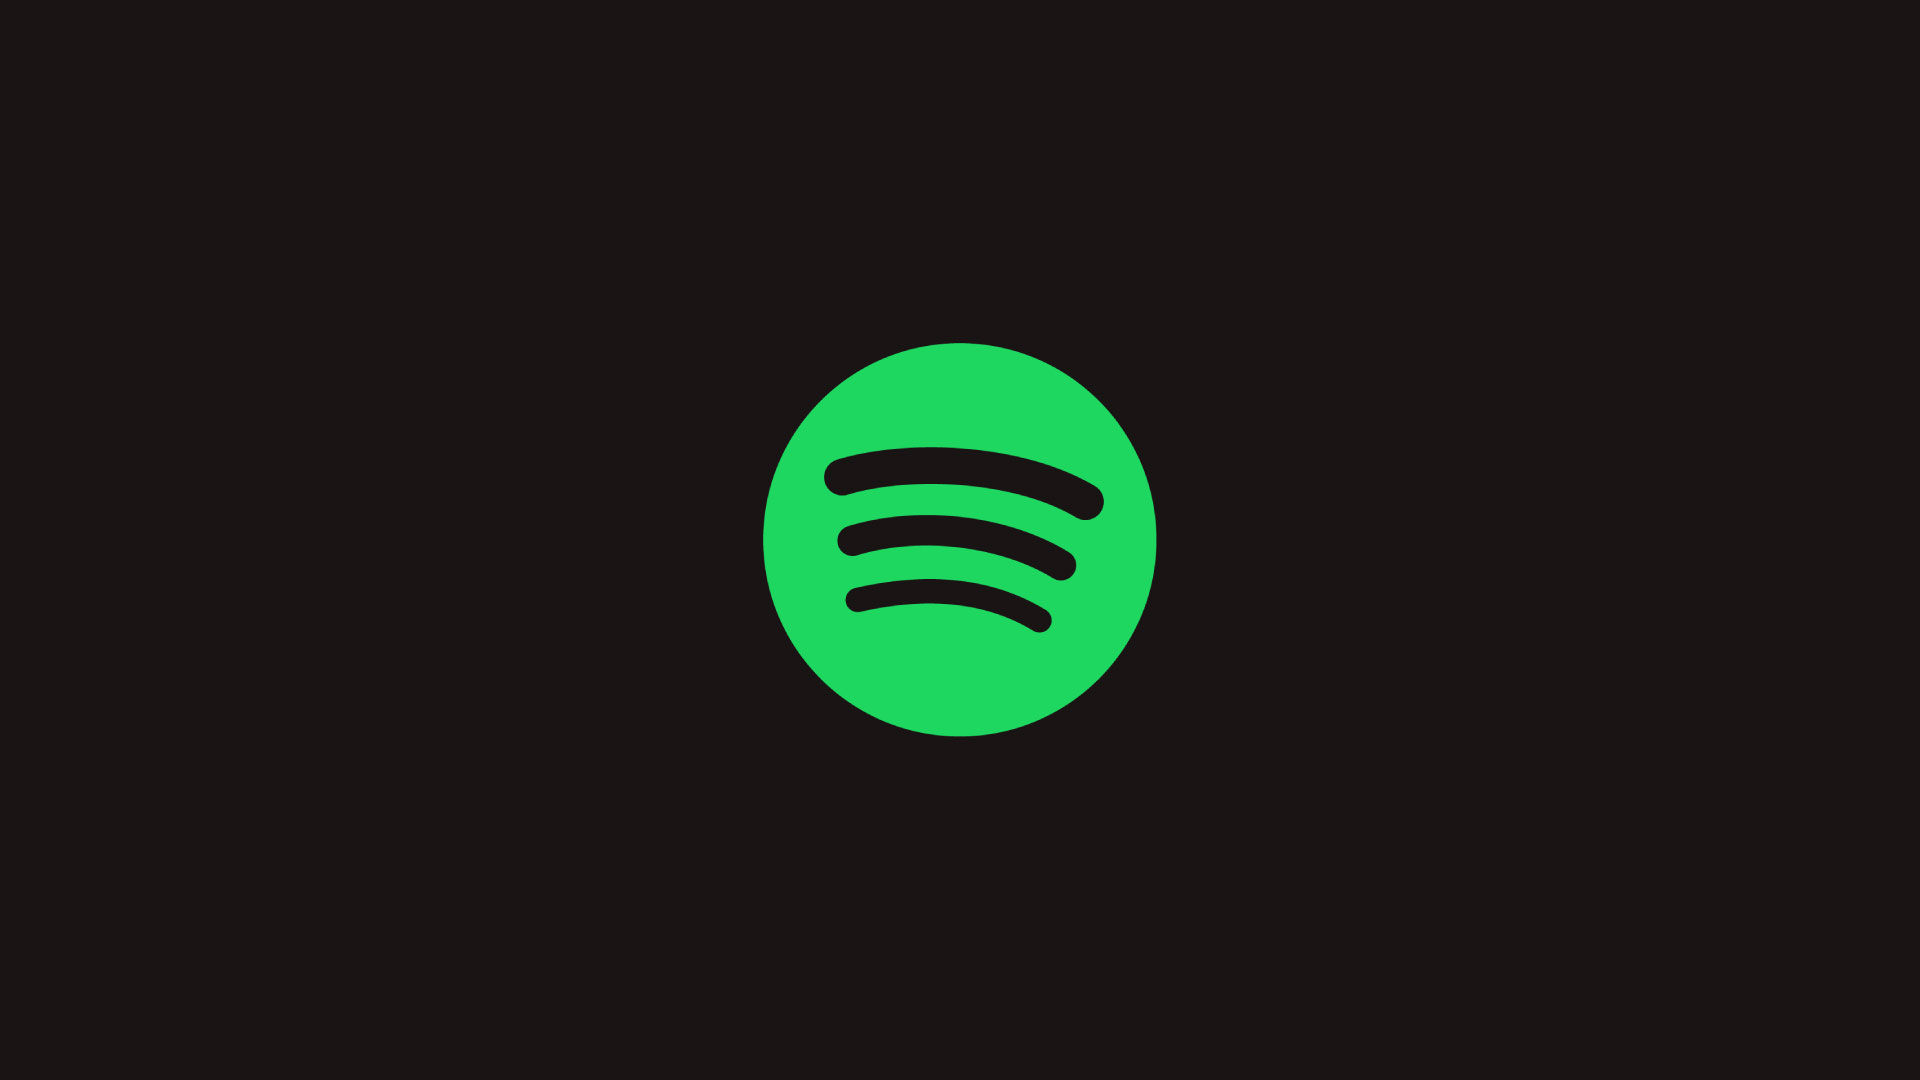 How to Crossfade Songs in Spotify